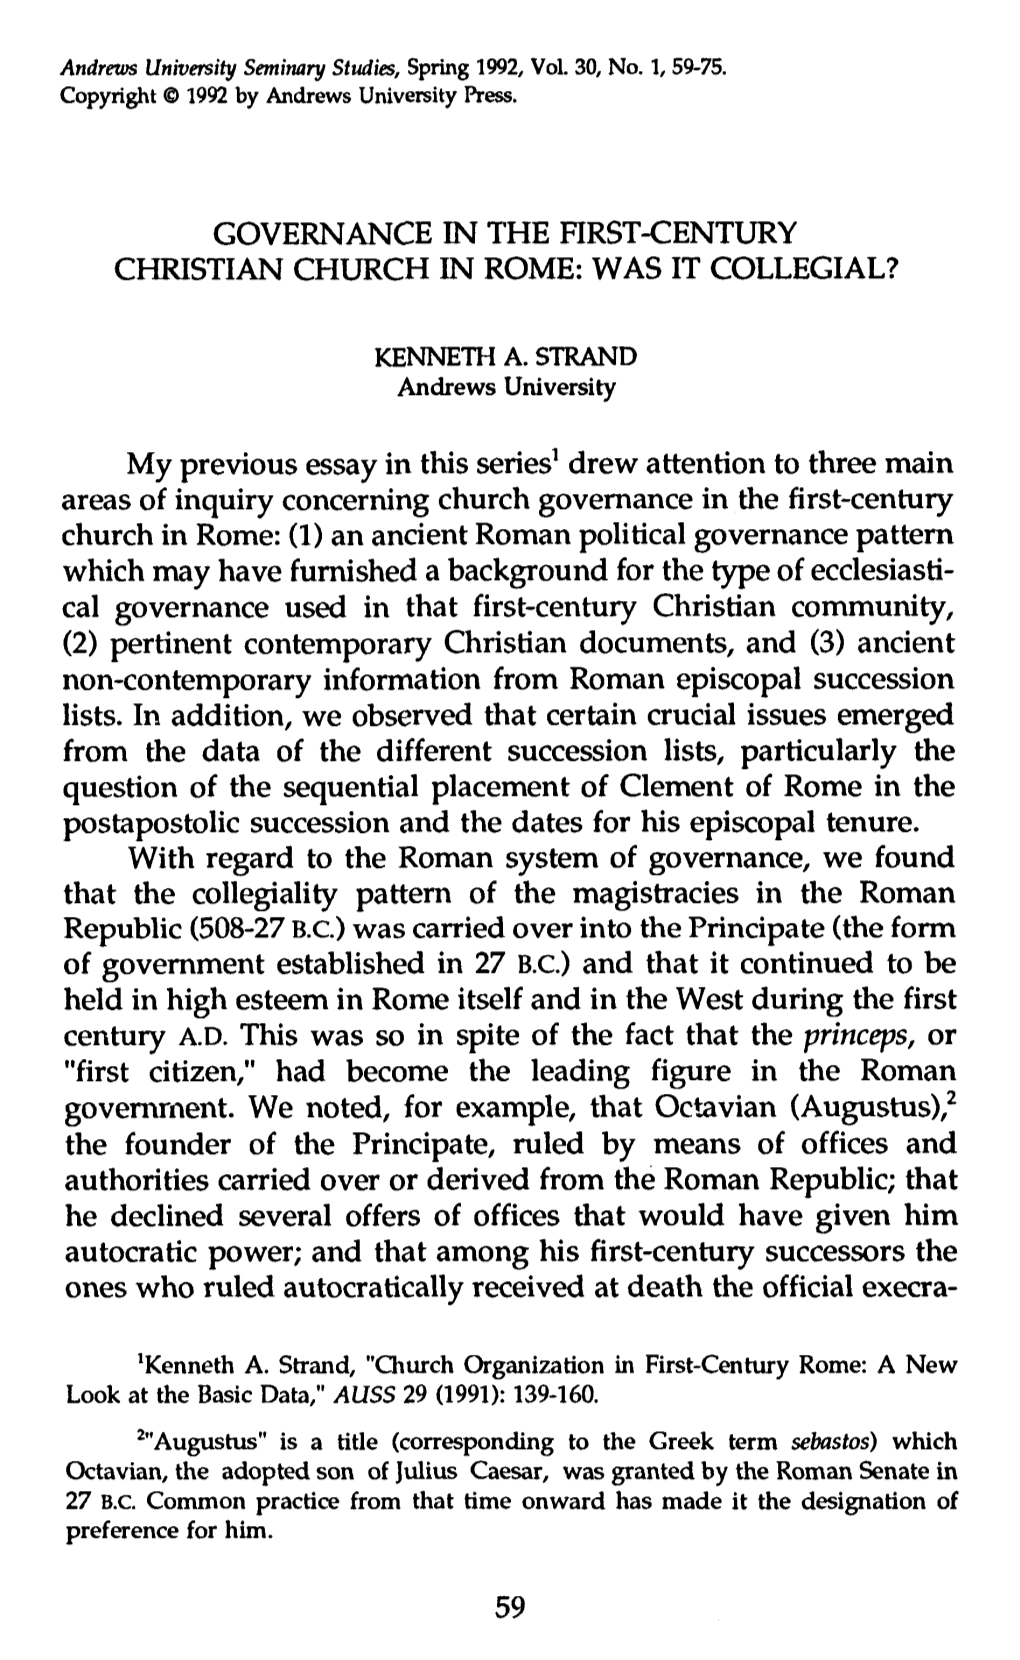 Governance in the First-Century Christian Church in Rome: Was It Collegial?